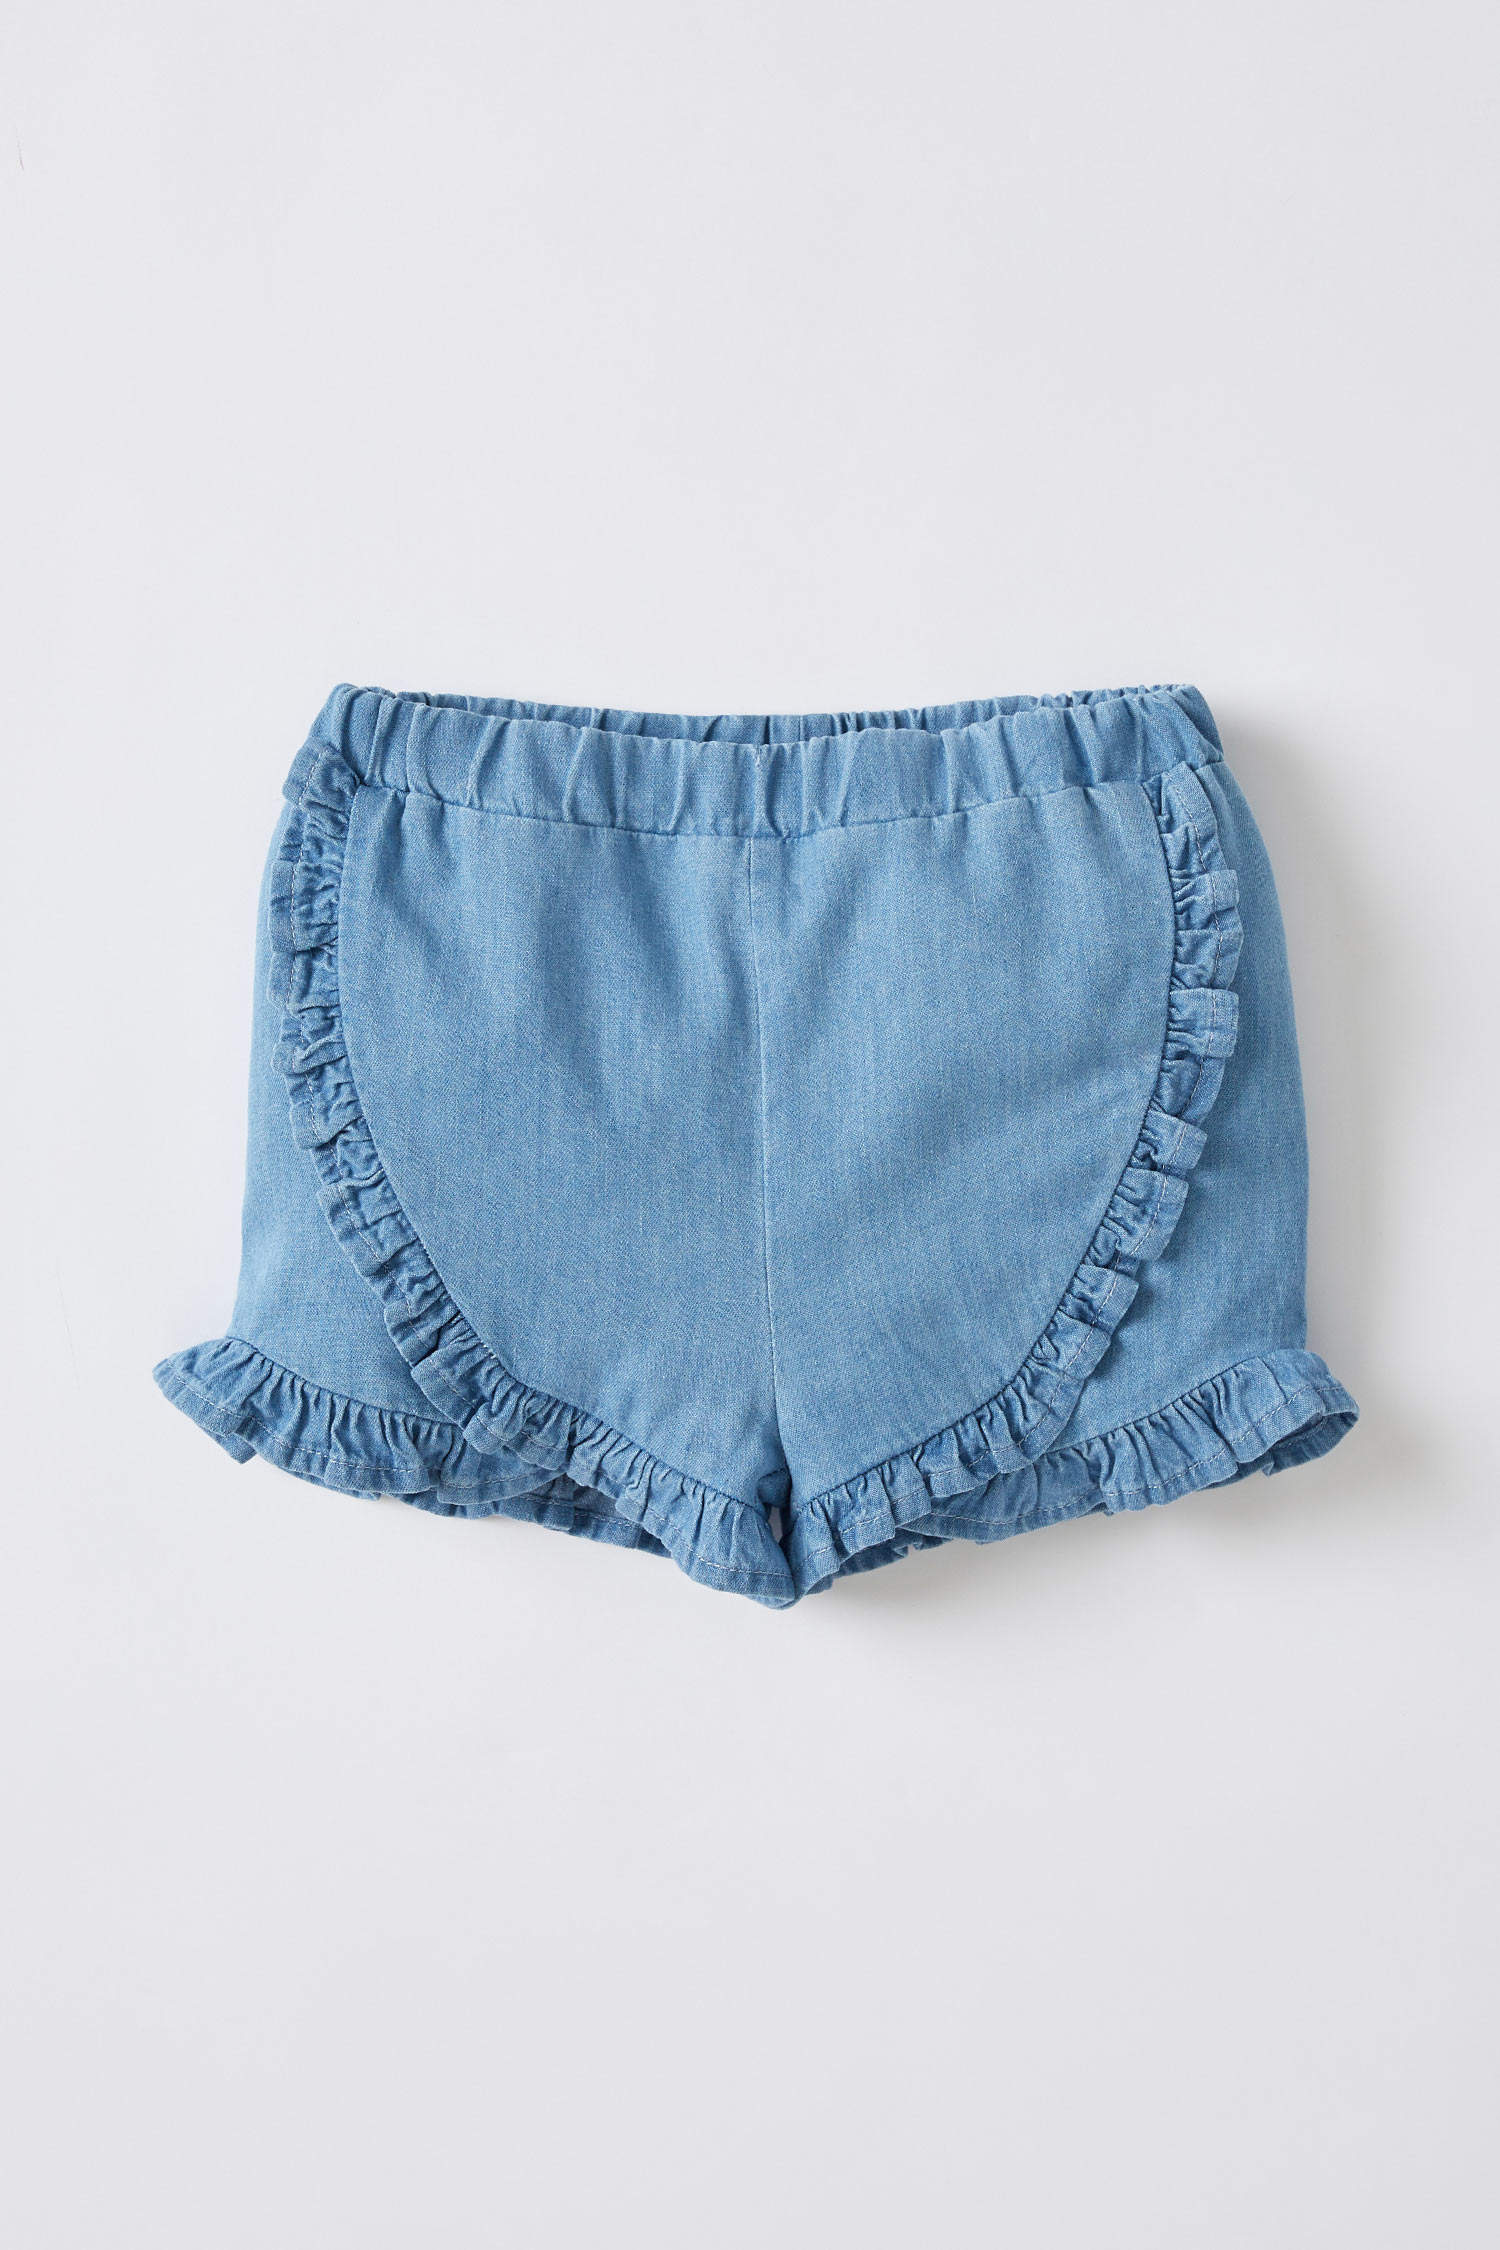 Unchanged Withered Catastrophe Short Jeans Bebe Fille Secure Payment, 50% OFF | evanstoncinci.org